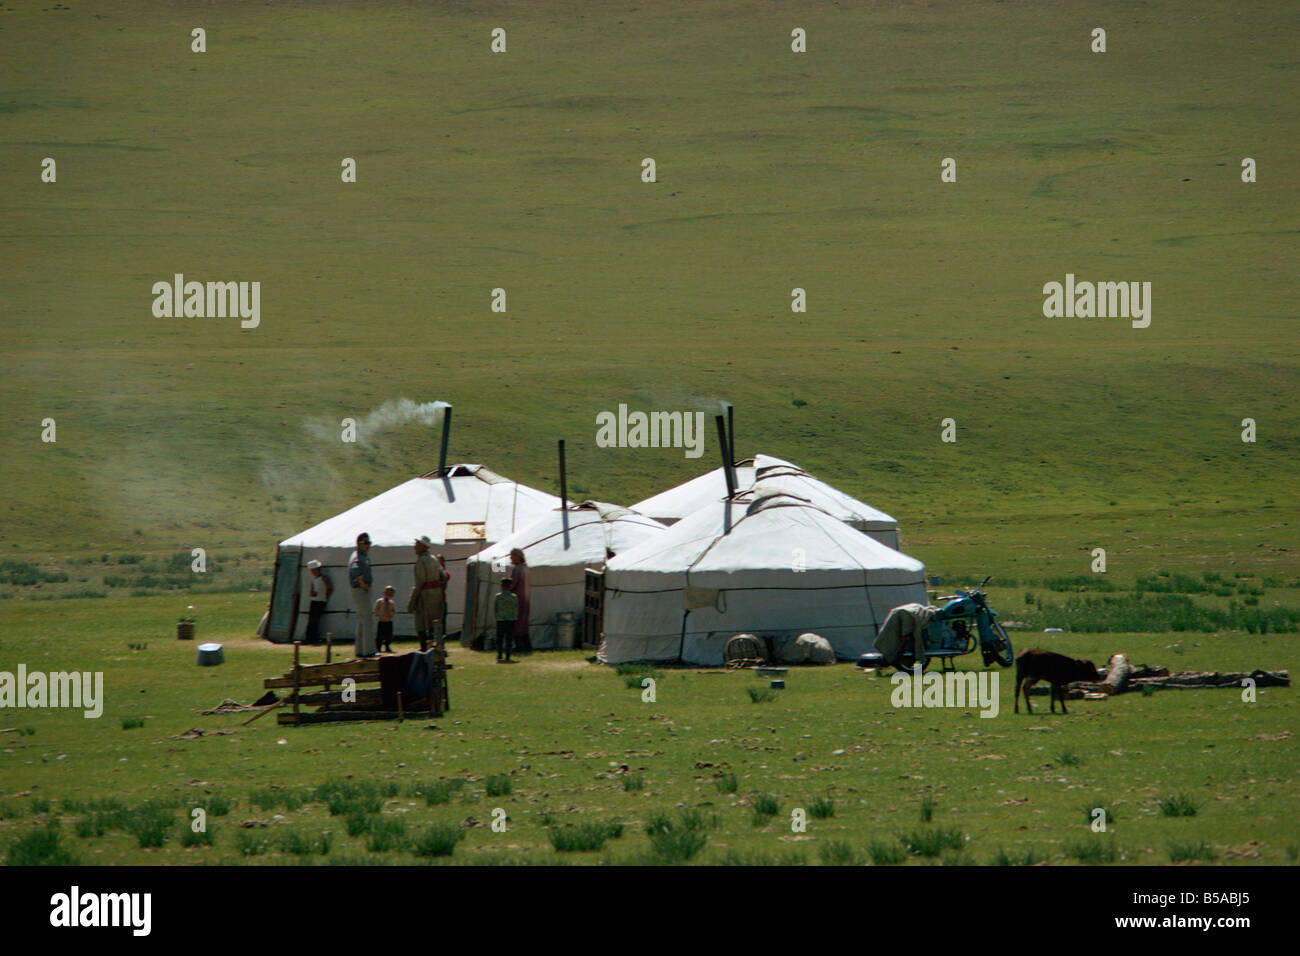 Yurts in a Ger camp near Hangay in Mongolia, Central Asia Stock Photo